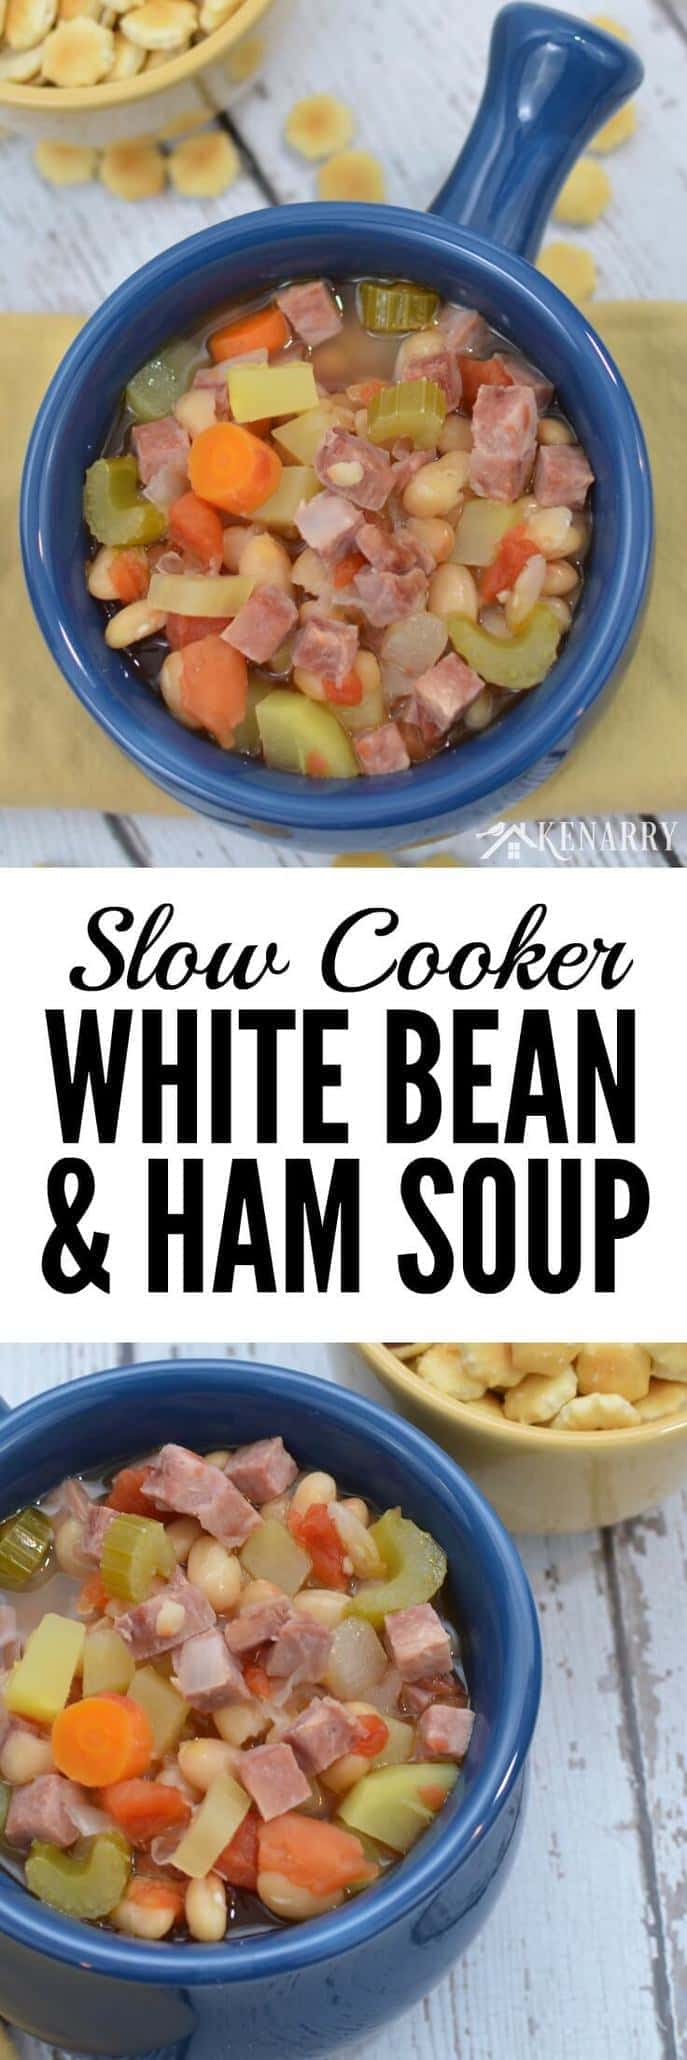 Slow Cooker White Bean and Ham Soup Recipe